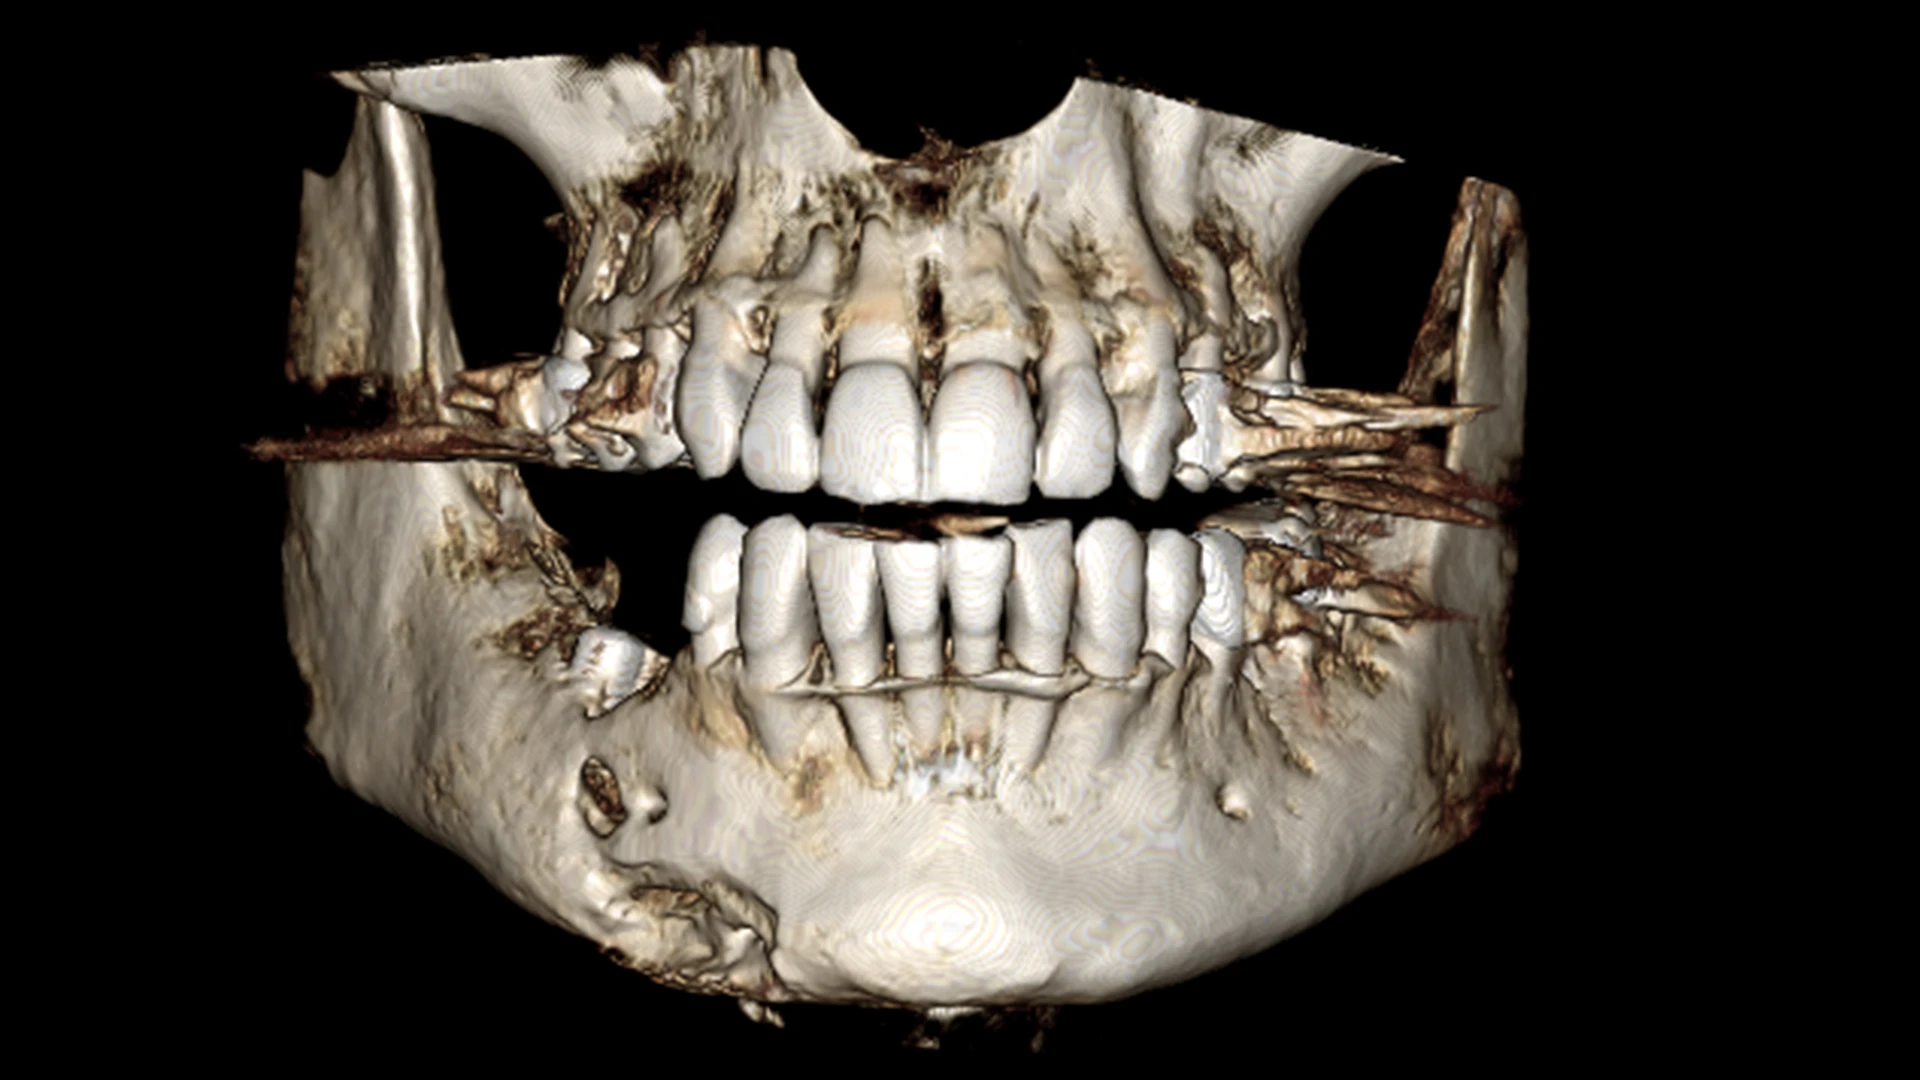 3D CT radiograph of the diseased mandible.